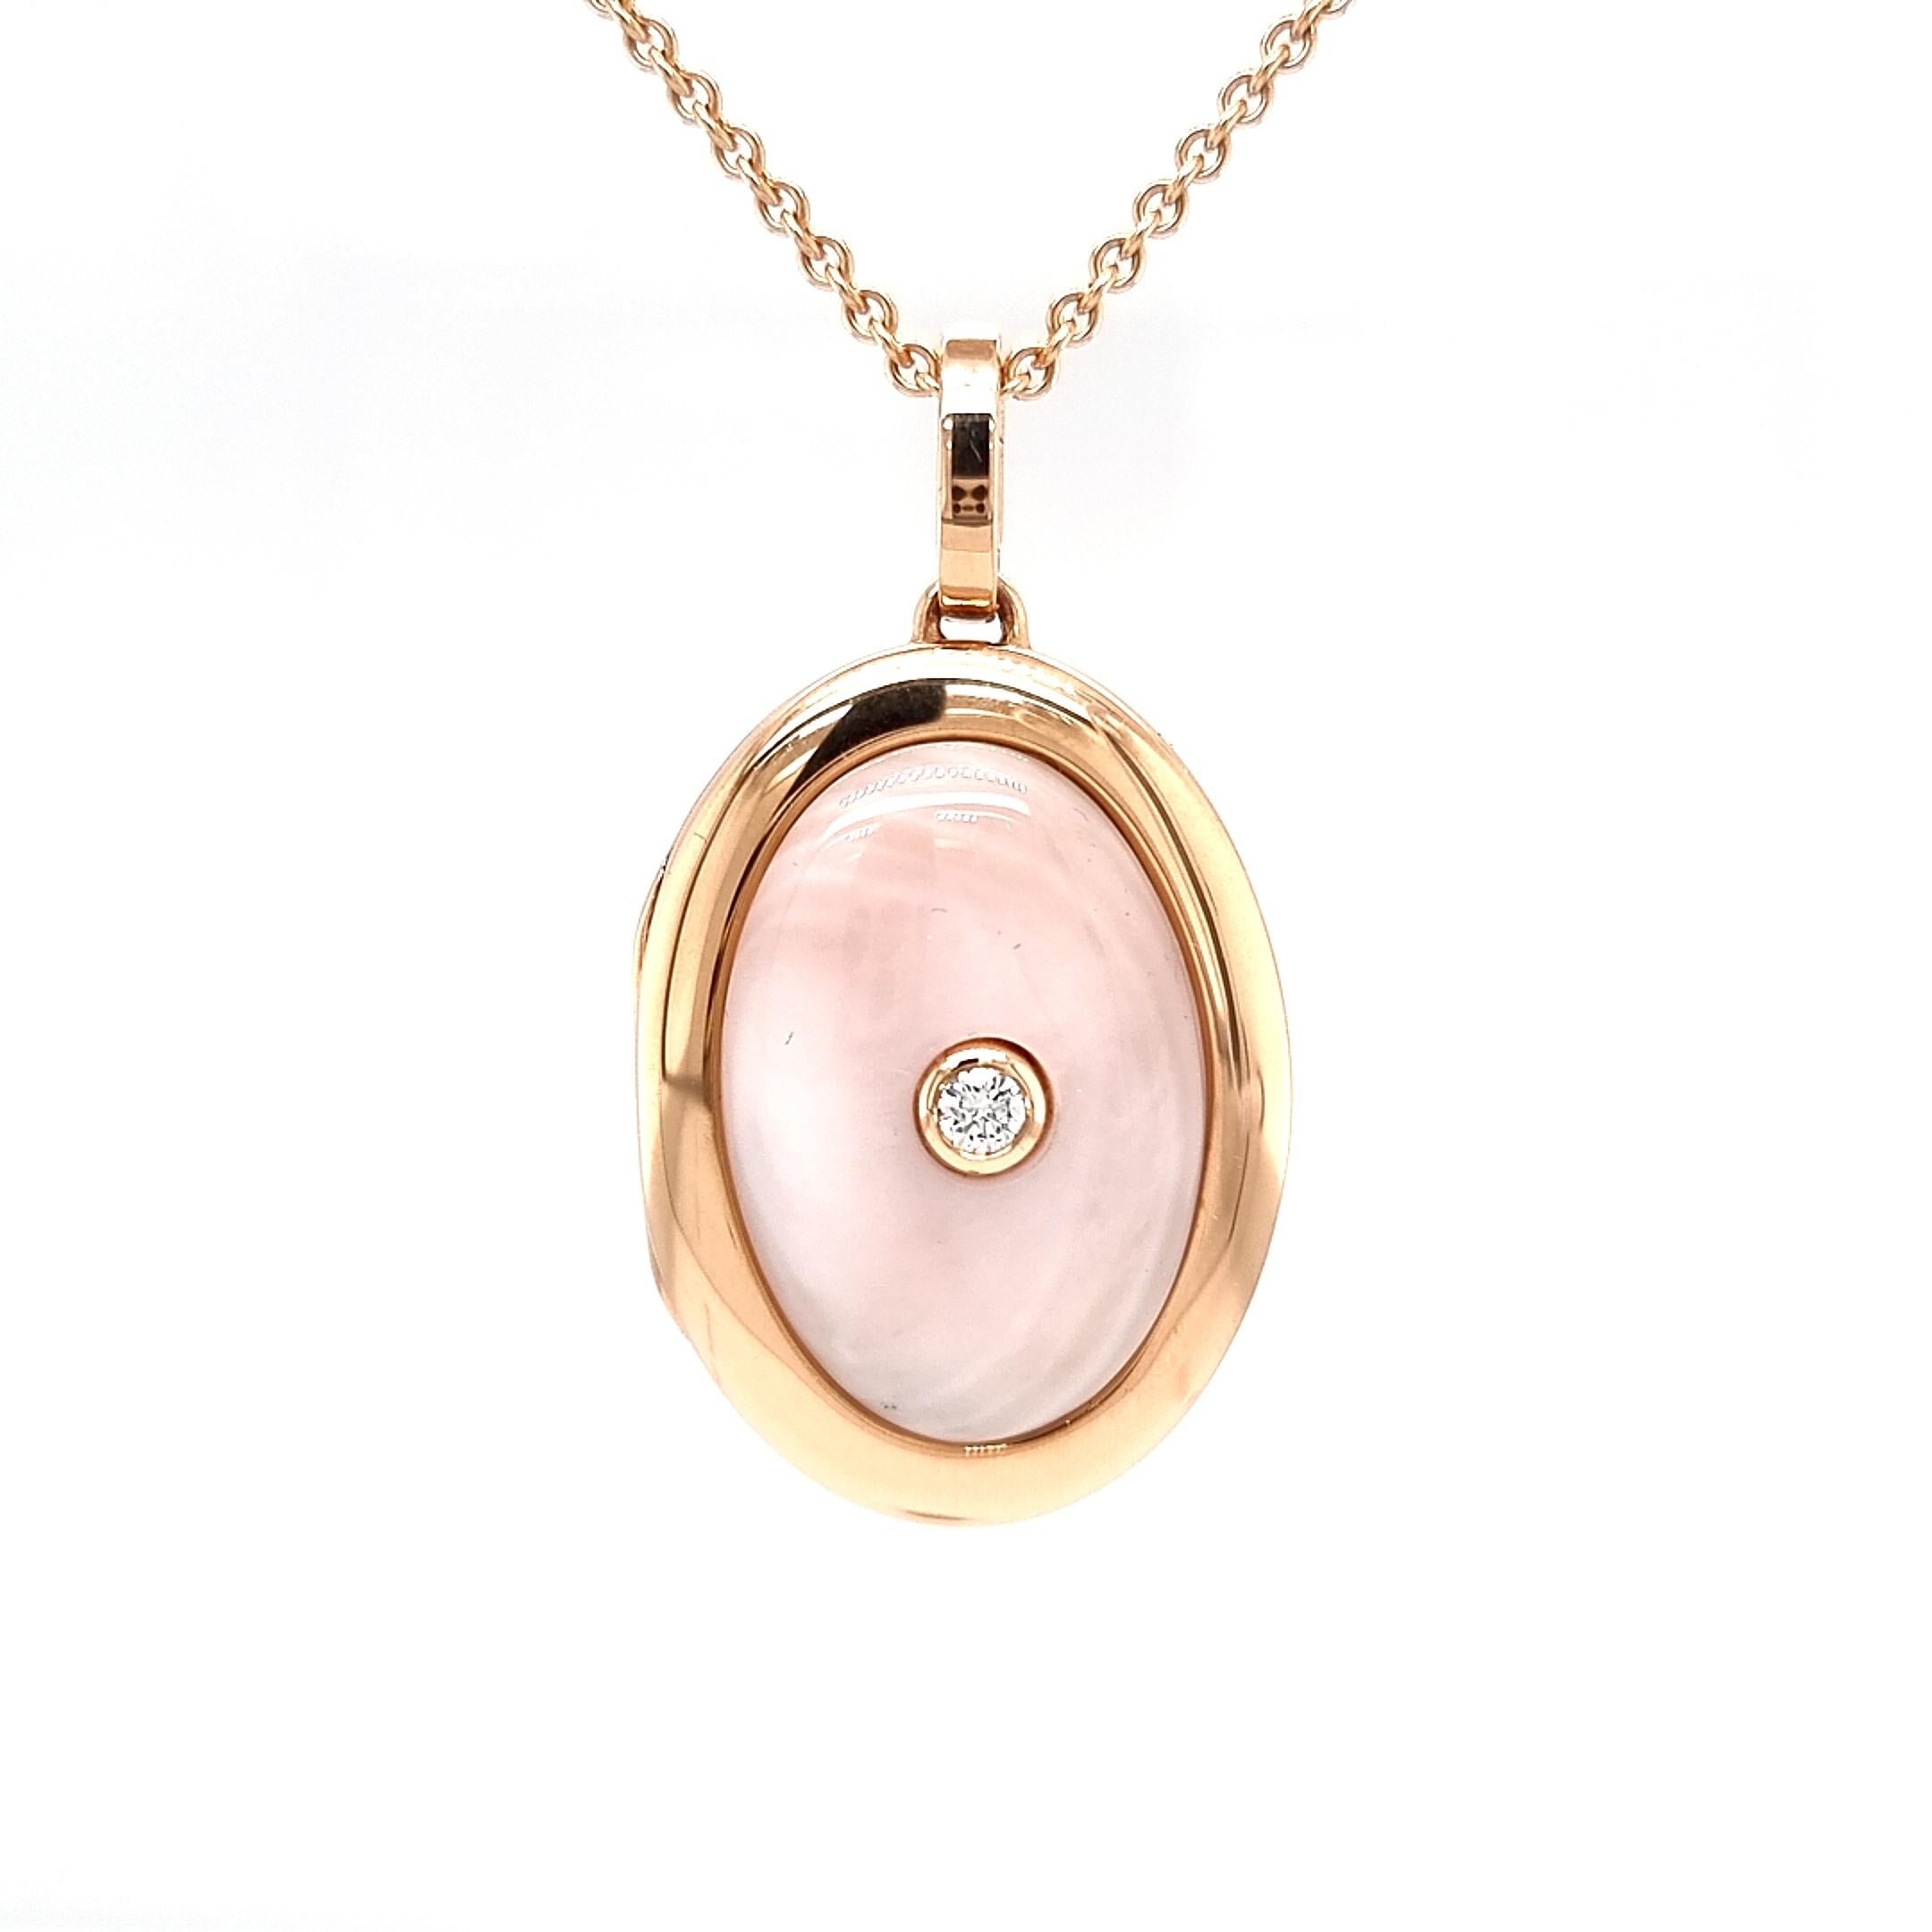 Victor Mayer customizable oval locket pendant 18k rose gold, Hallmark collection, 1 diamond, total 0.10 ct, H VS, 1 pink cut pearl

About the creator Victor Mayer
Victor Mayer is internationally renowned for elegant timeless designs and unrivalled